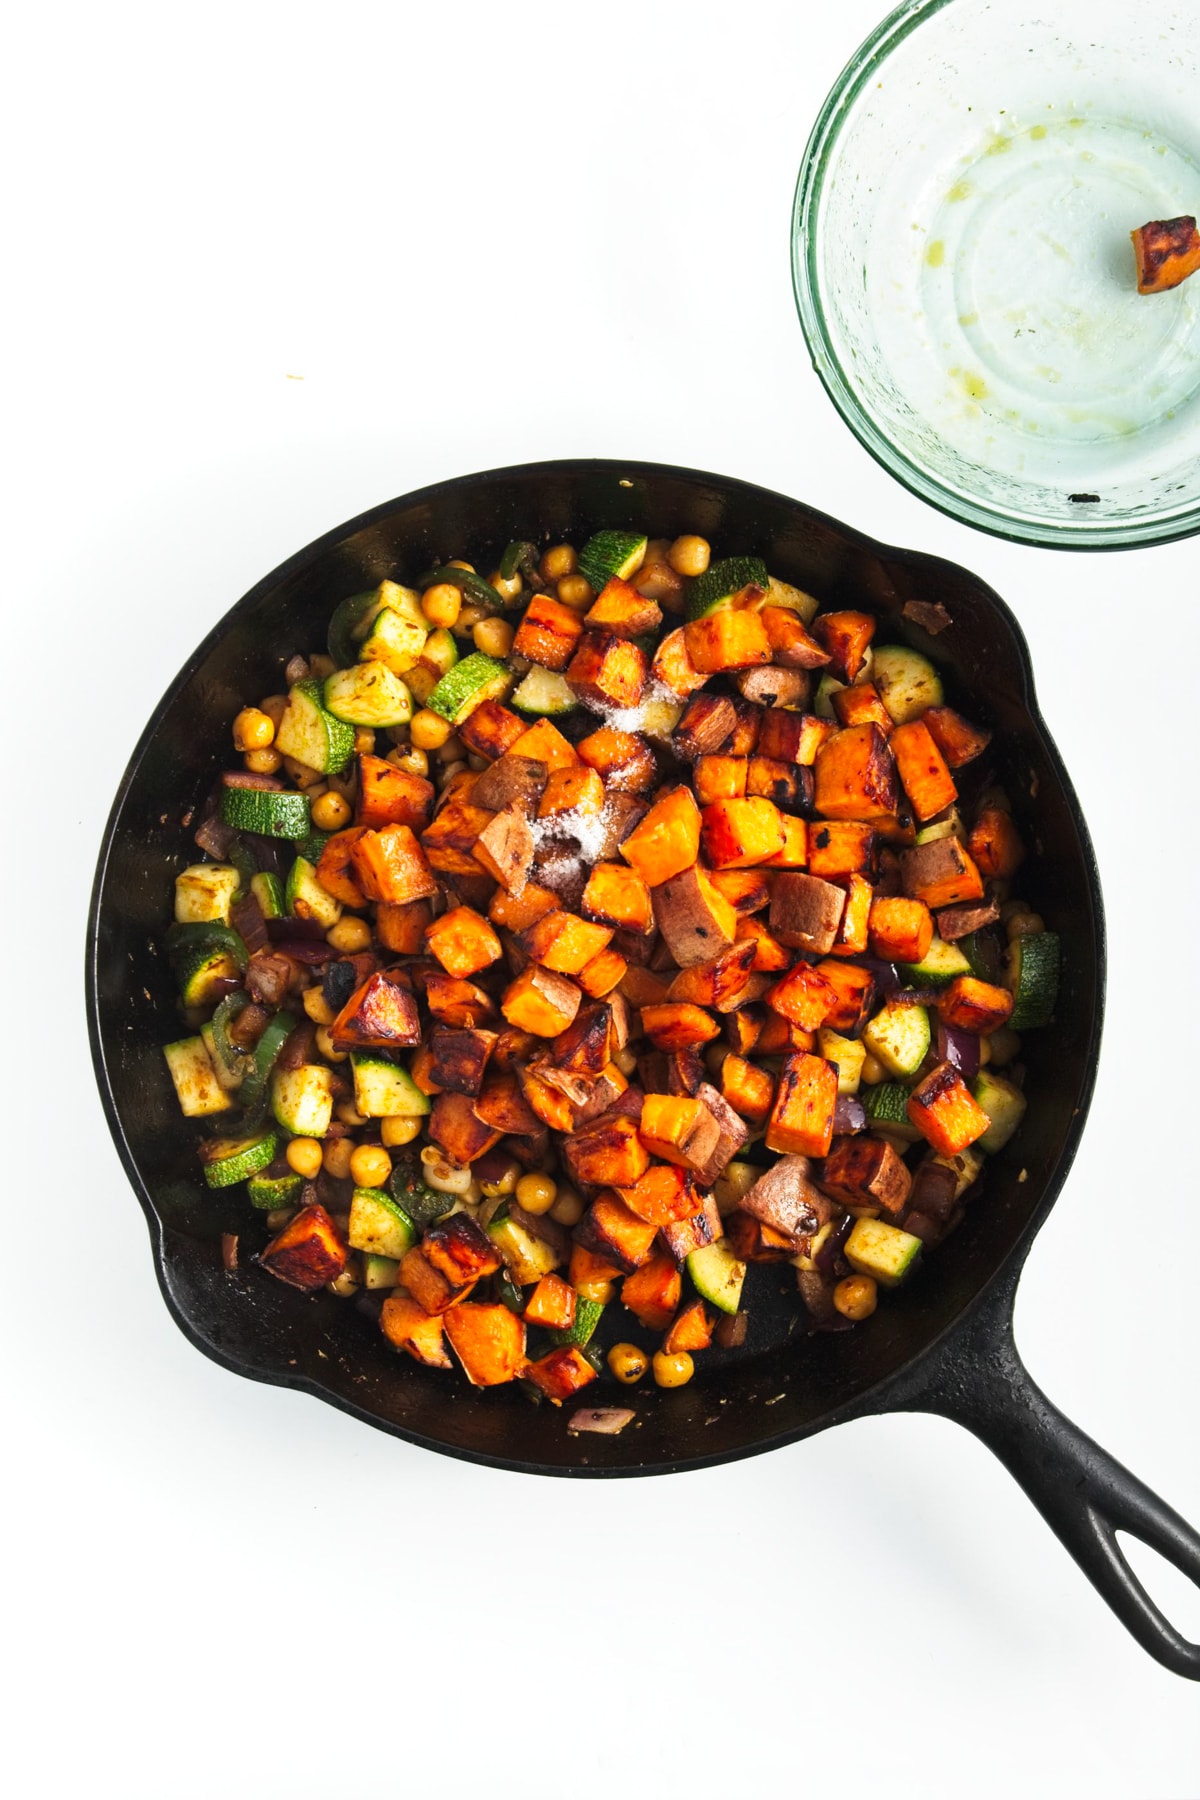 chopped sweet potatoes added to the veggies in a black skillet